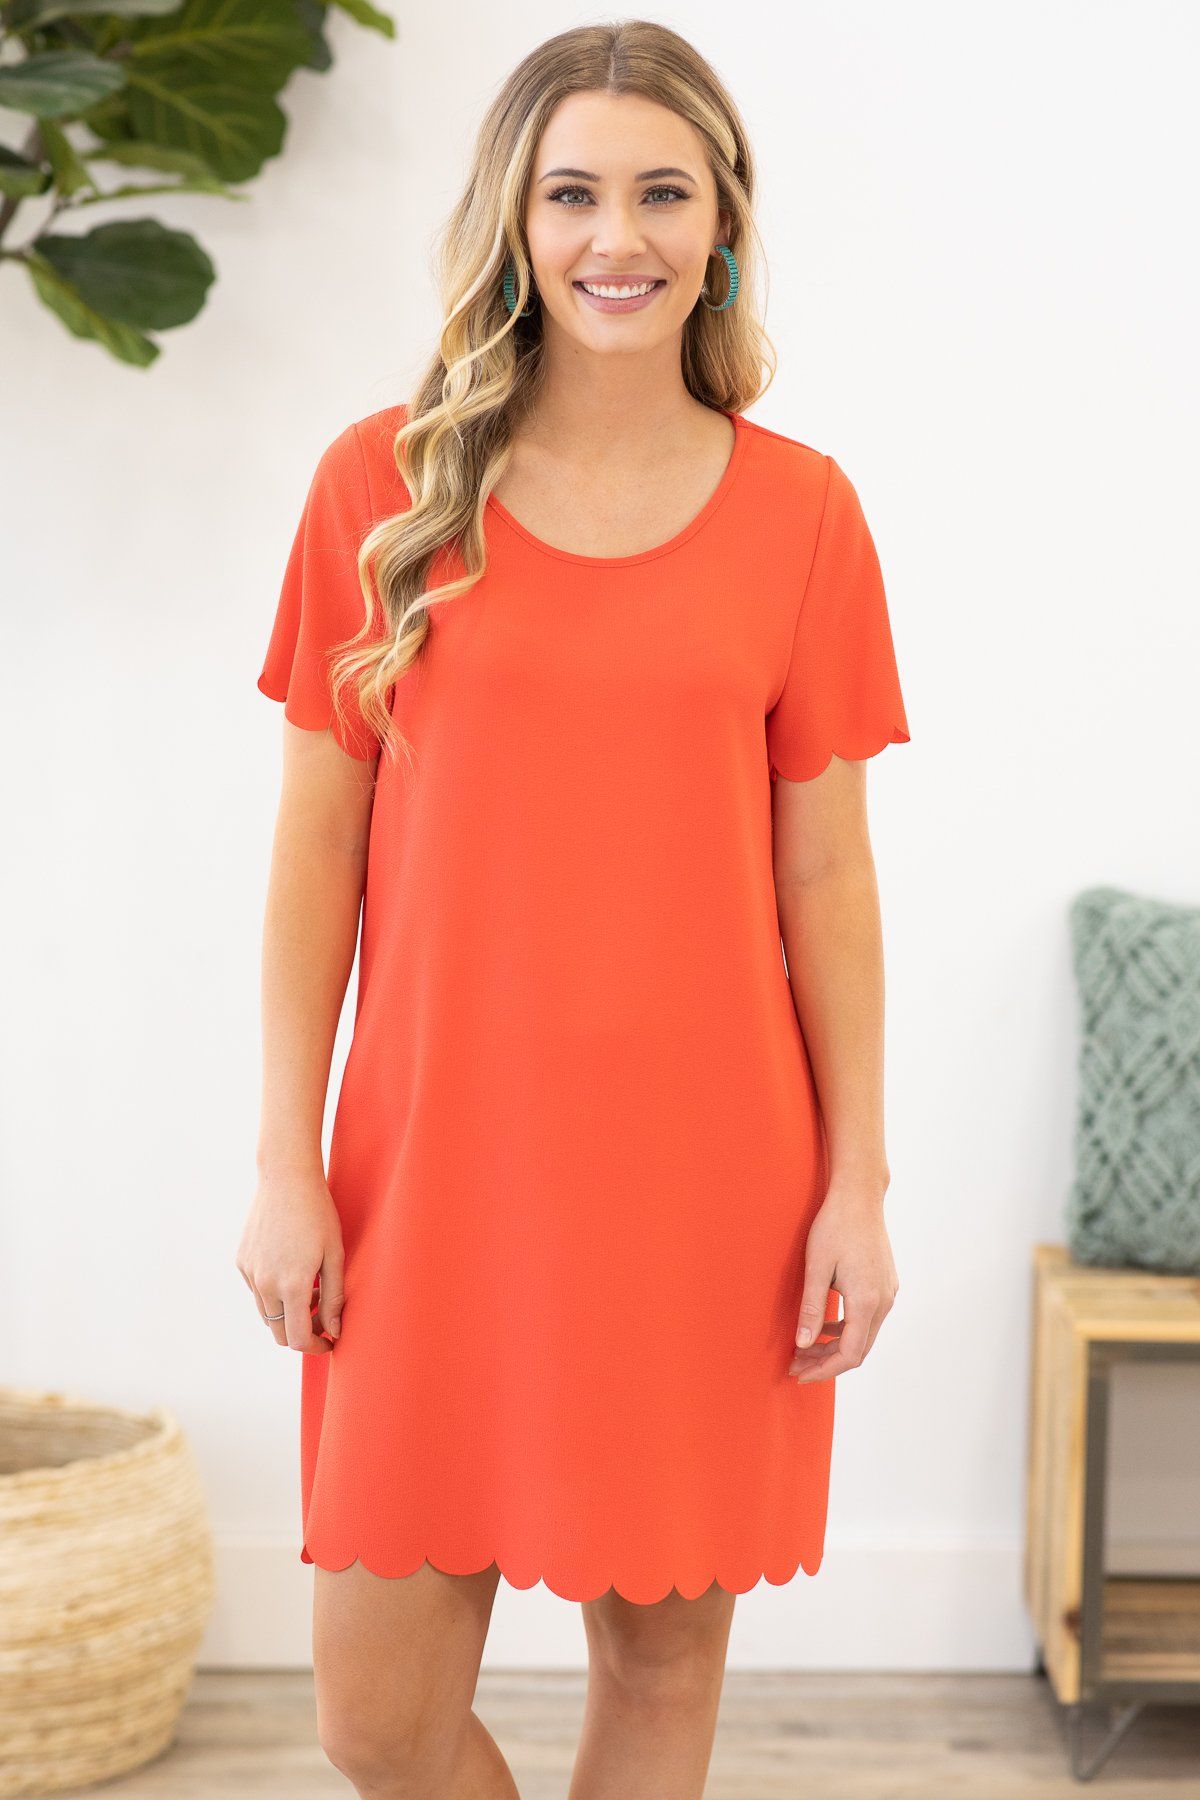 Always Smiling Dress in Red - Filly Flair